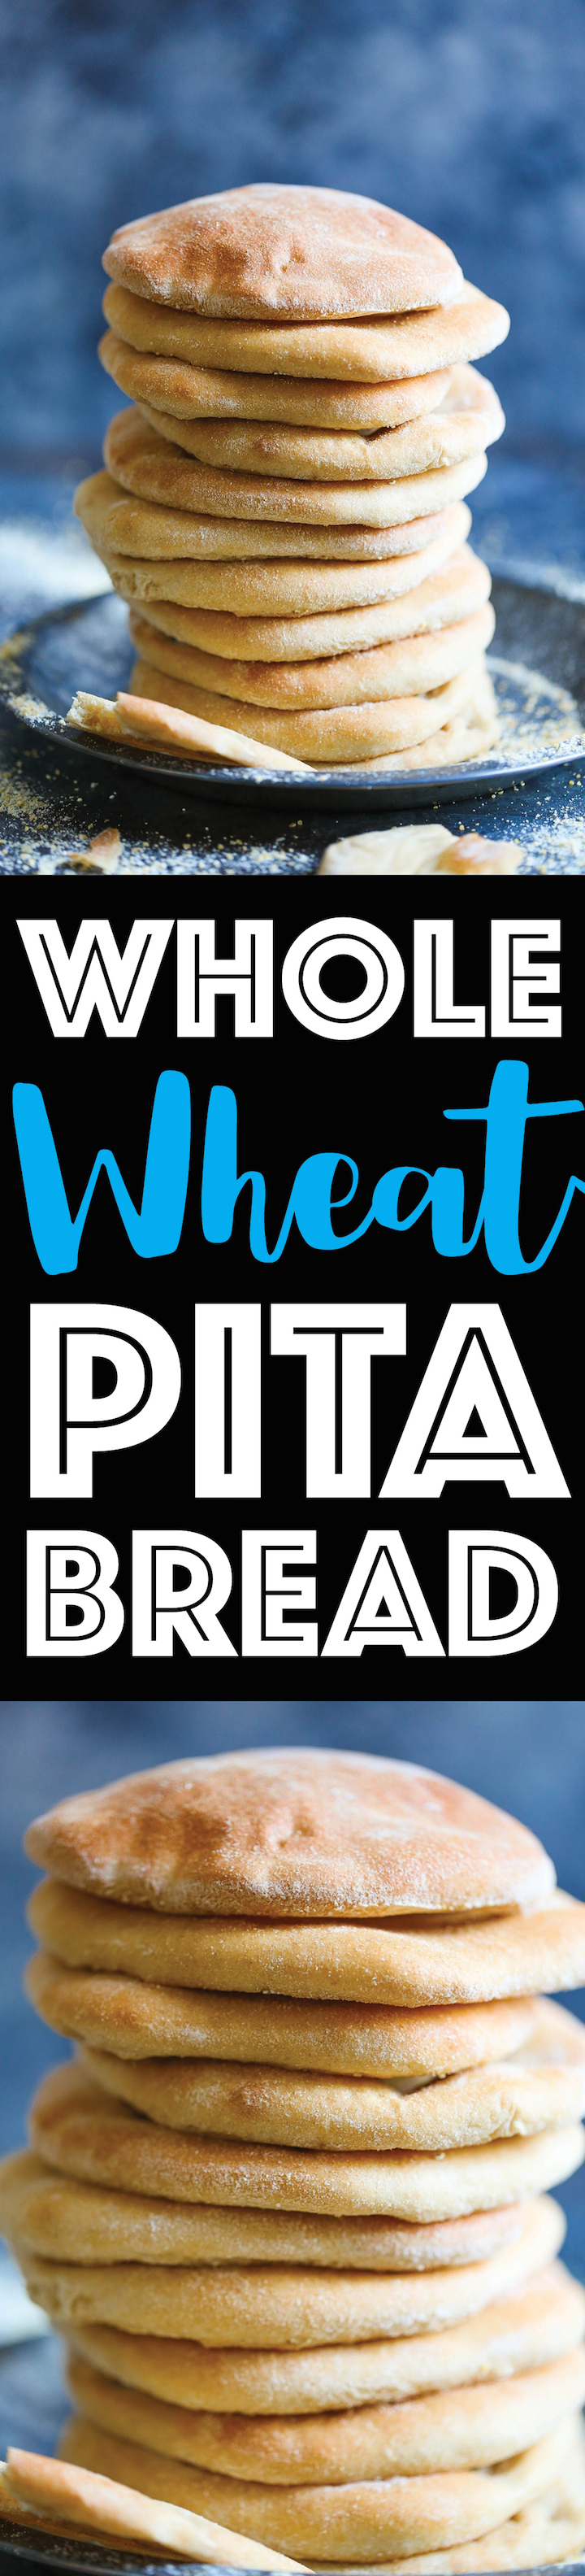 Whole Wheat Pita Bread - There really is nothing better than homemade pita bread. It is so much healthier and it is unbelievably soft and fluffy. You will never want store-bought pita bread EVER AGAIN!